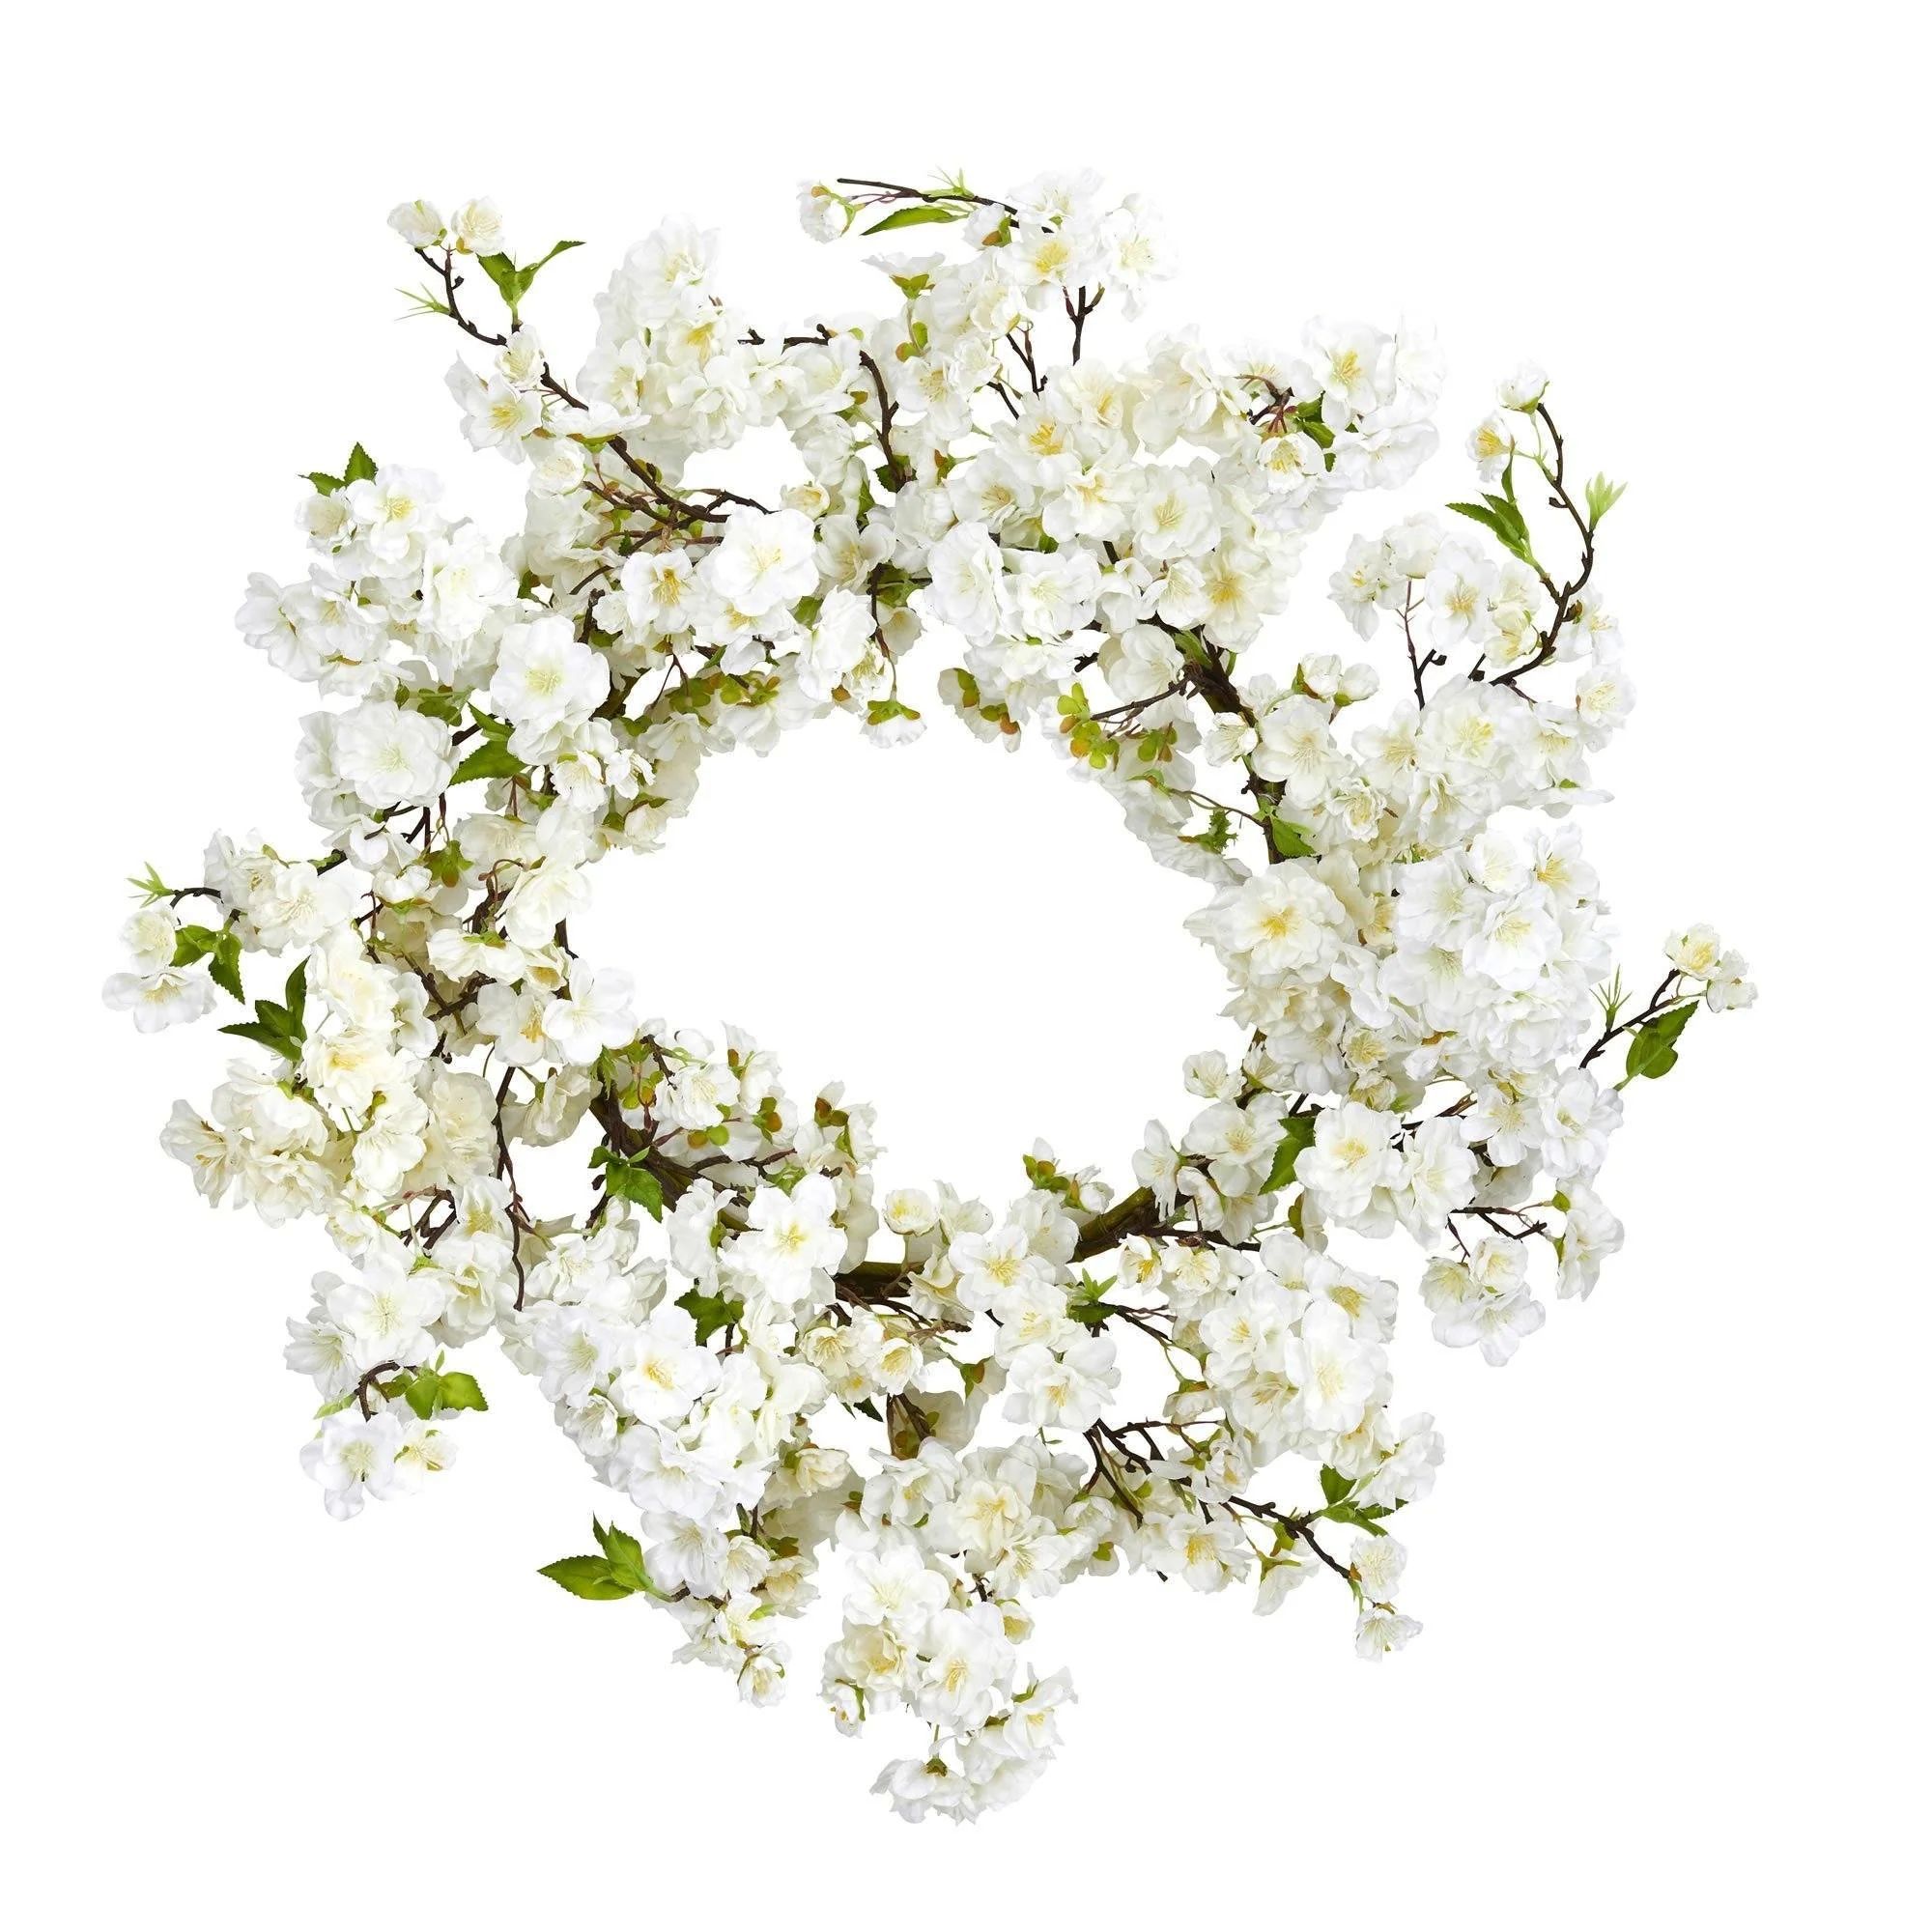 24” White Flower Blossom Wreath | Nearly Natural | Nearly Natural